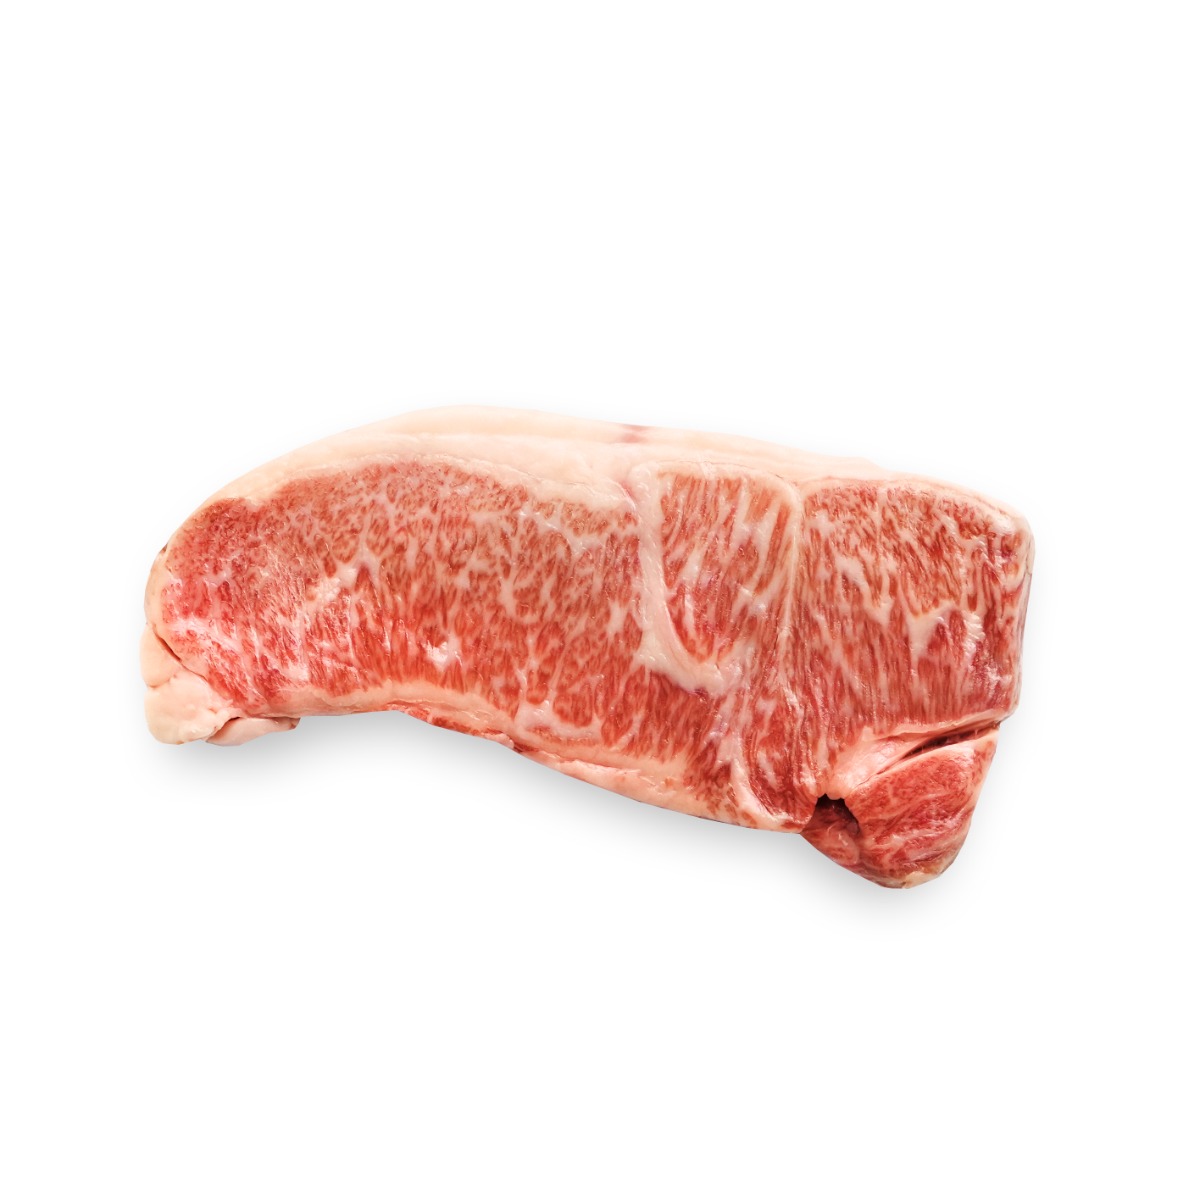 Japanese Wagyu Beef: The Forbidden Meat